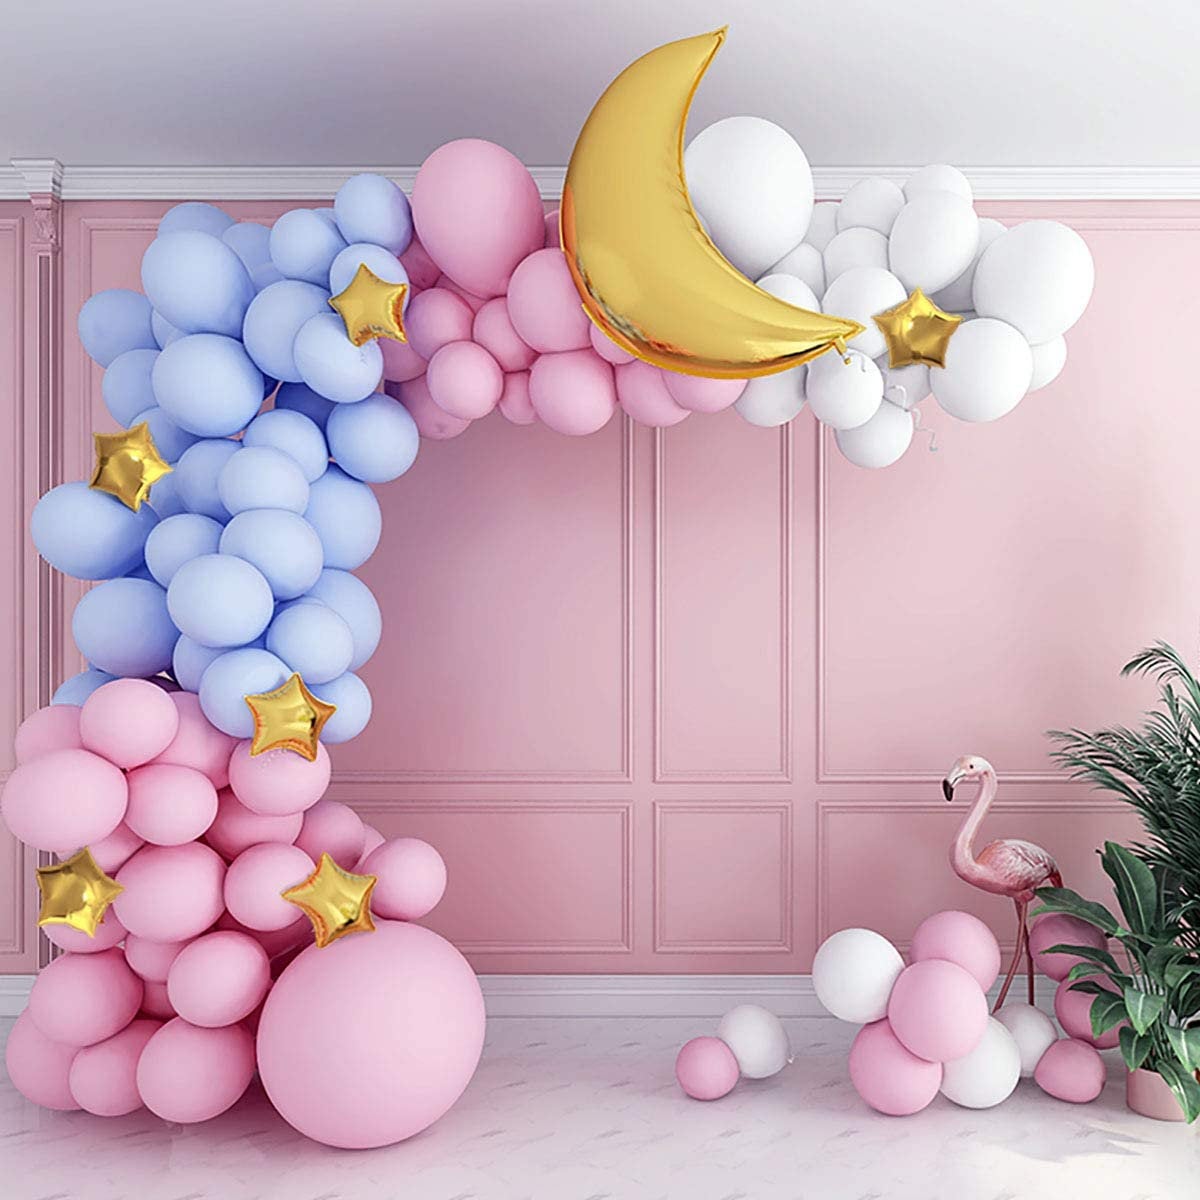 Pastel Gender Reveal Garland Balloon Kit from Ellie's Party Supply